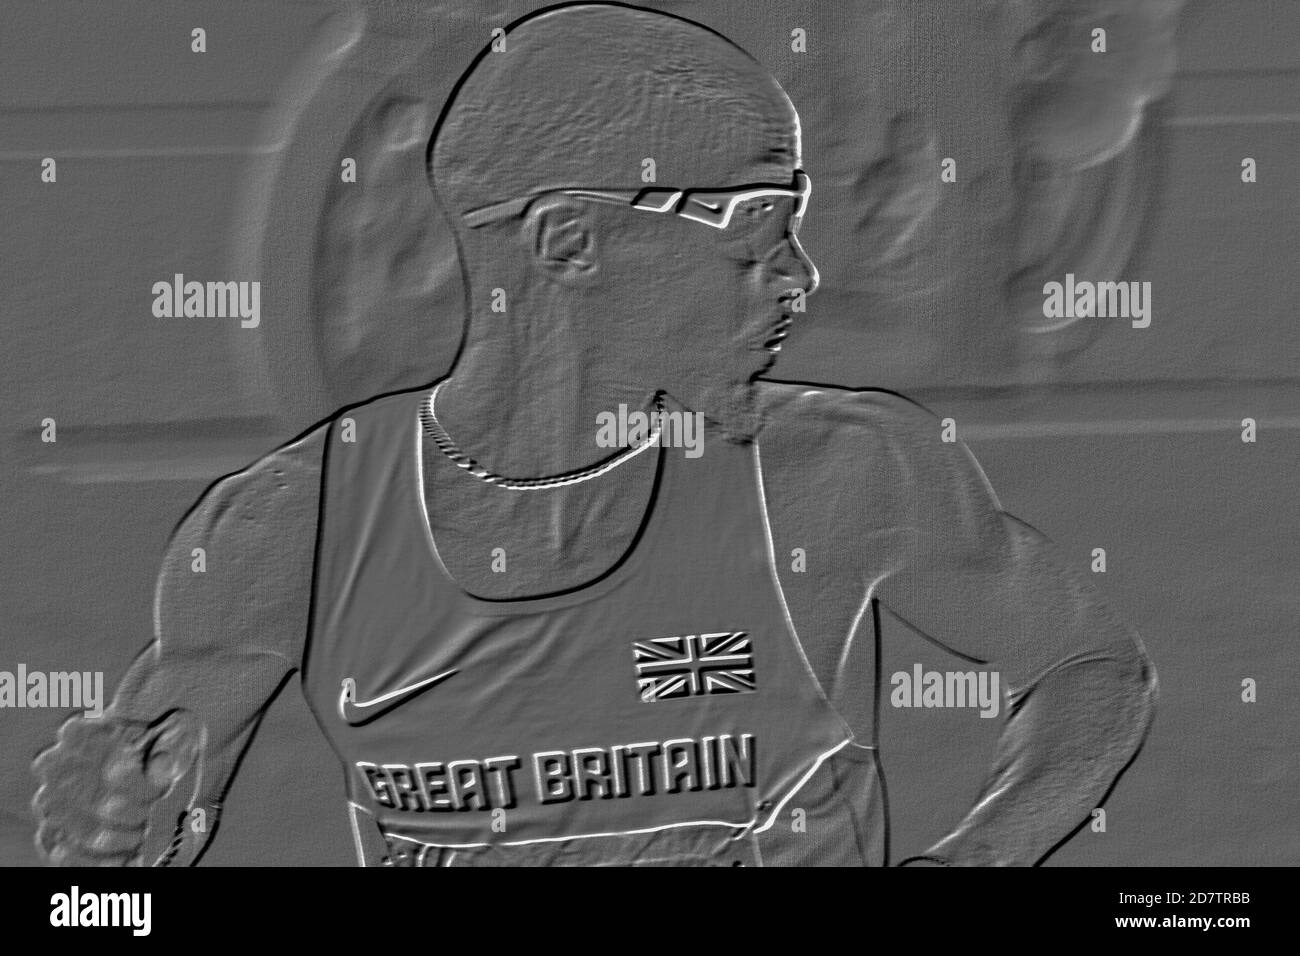 Mo Farah during his race in the London Marathon looking back.London Marathon results 2014: Mo Farah finishes four minutes behind winner Wilson Kipsang in eighth place and admits 'I have gone straight in at the deep end'  Double Olympic gold medallist moved up to the 26.2-mile distance for the first time Stock Photo